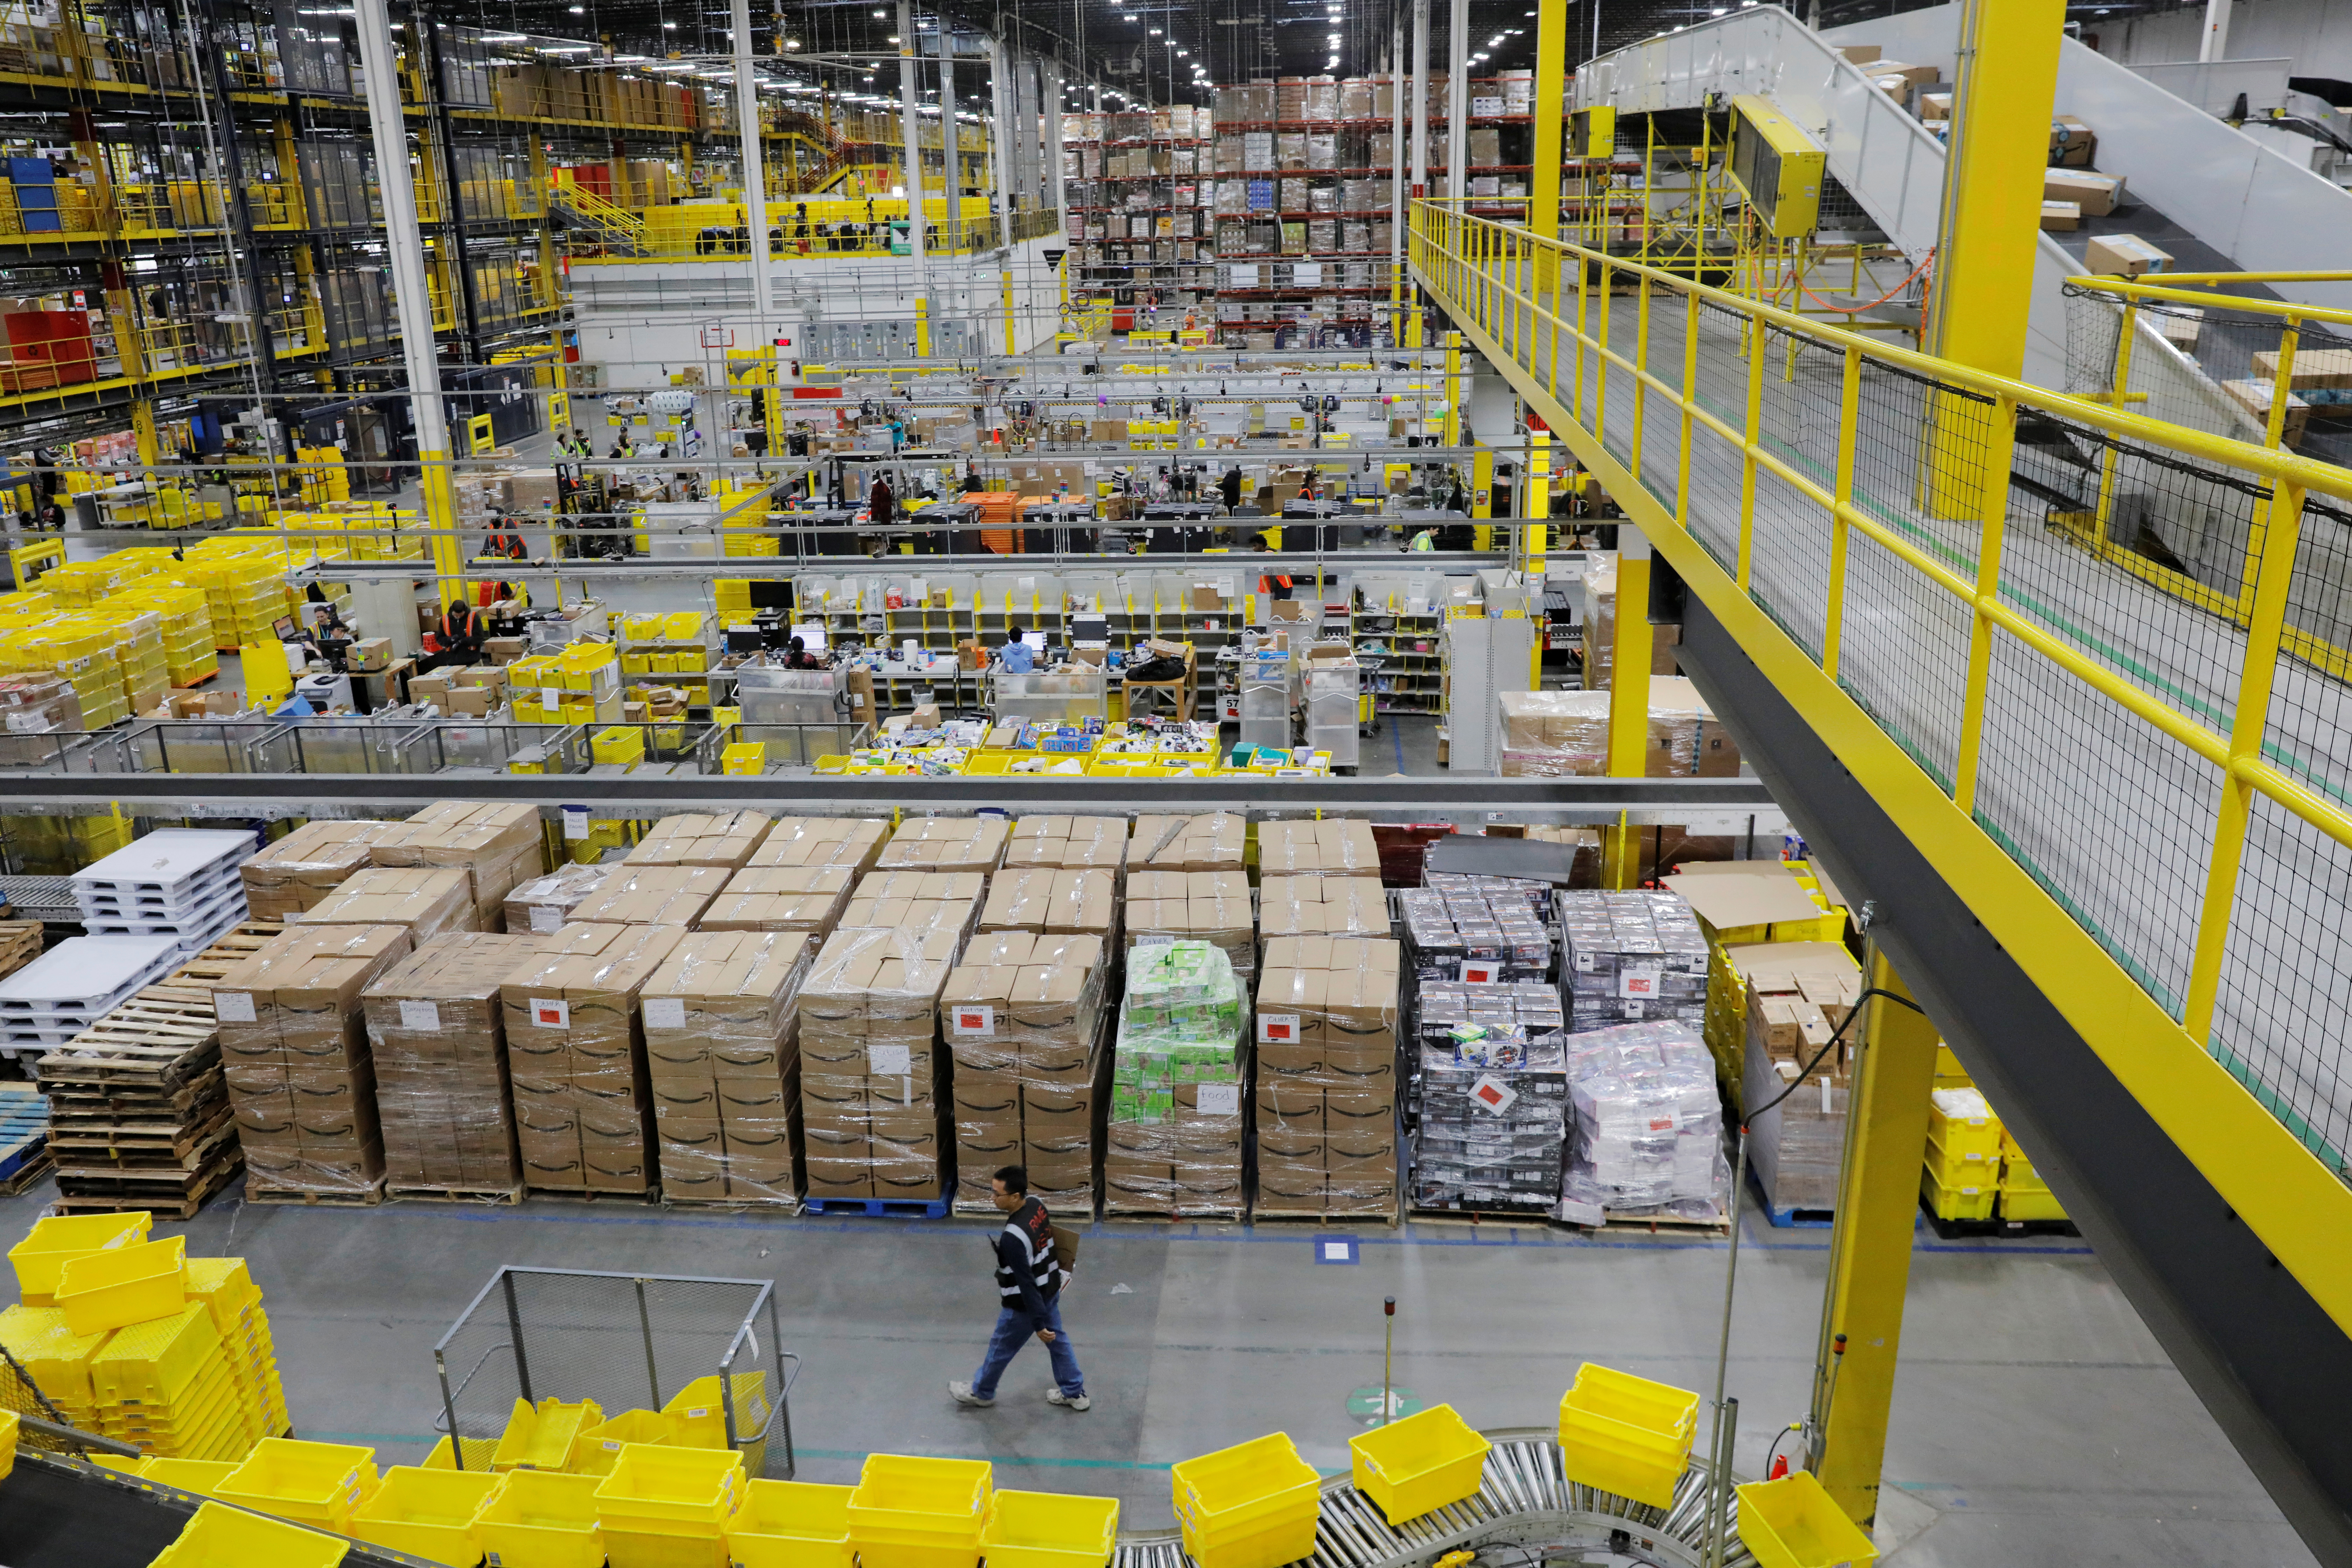 Amazon workers perform their jobs inside of an Amazon fulfillment center on Cyber Monday in Robbinsville, New Jersey, U.S., December 2, 2019.  REUTERS/Lucas Jackson